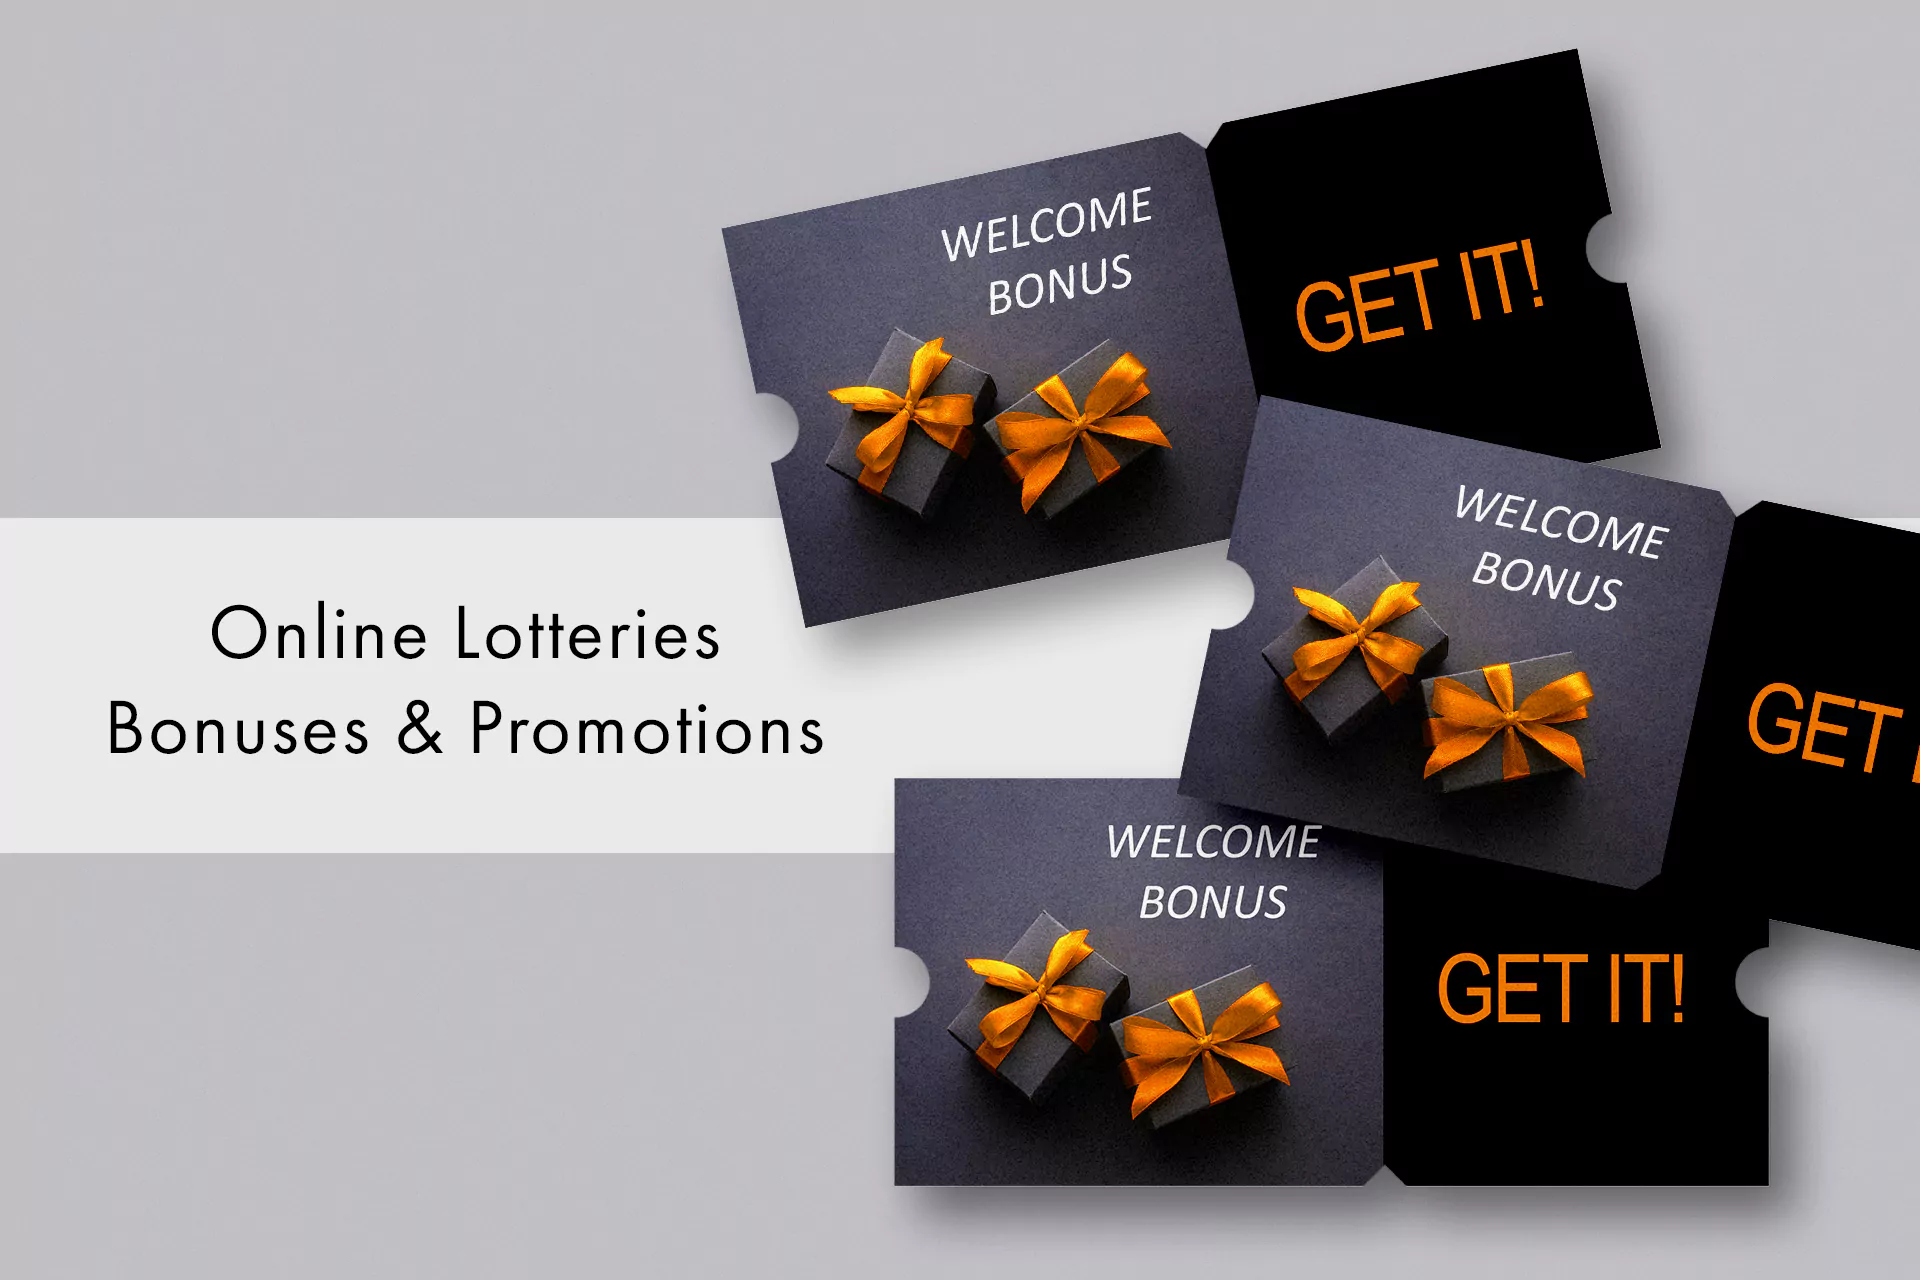 When you buy tickets online lotteries you can get bonuses.